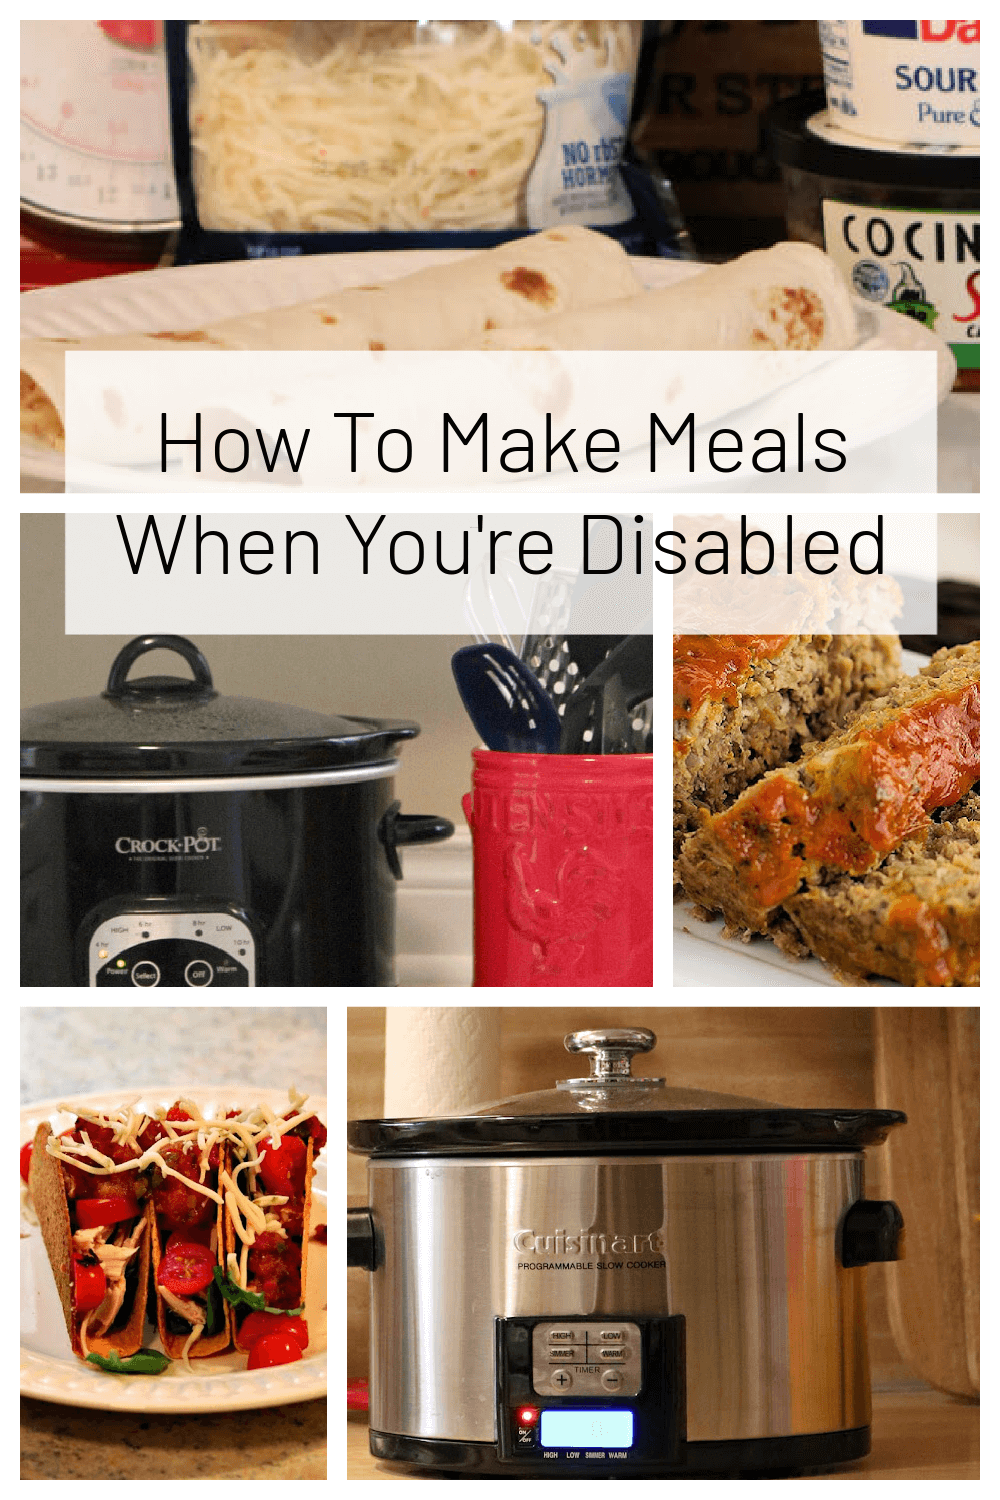 How To Make Meals When You’re Disabled